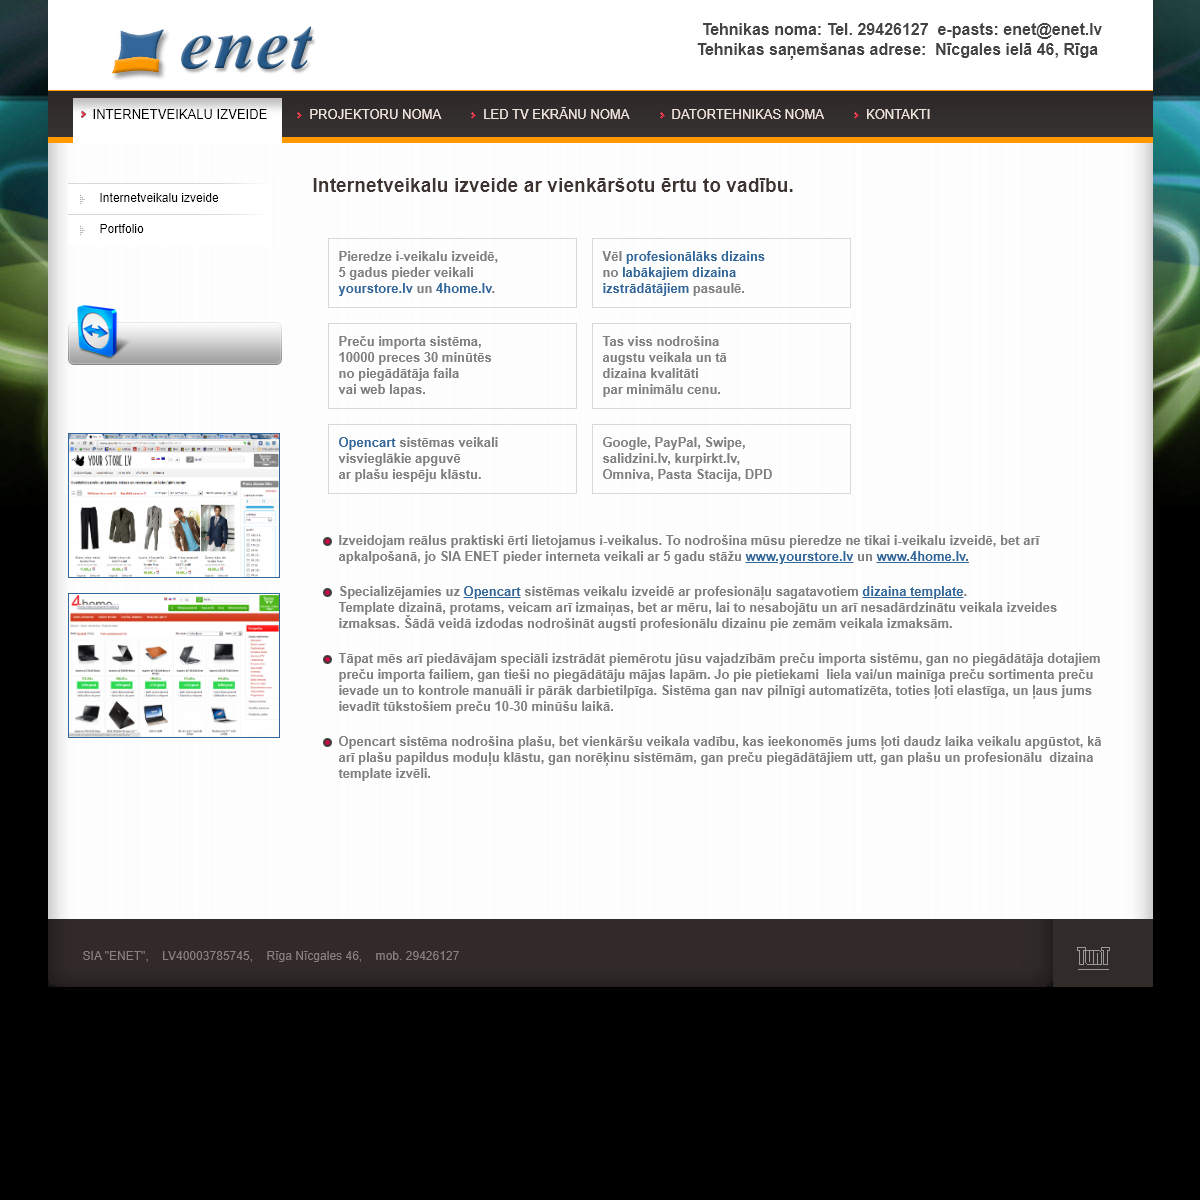 A complete backup of enet.lv